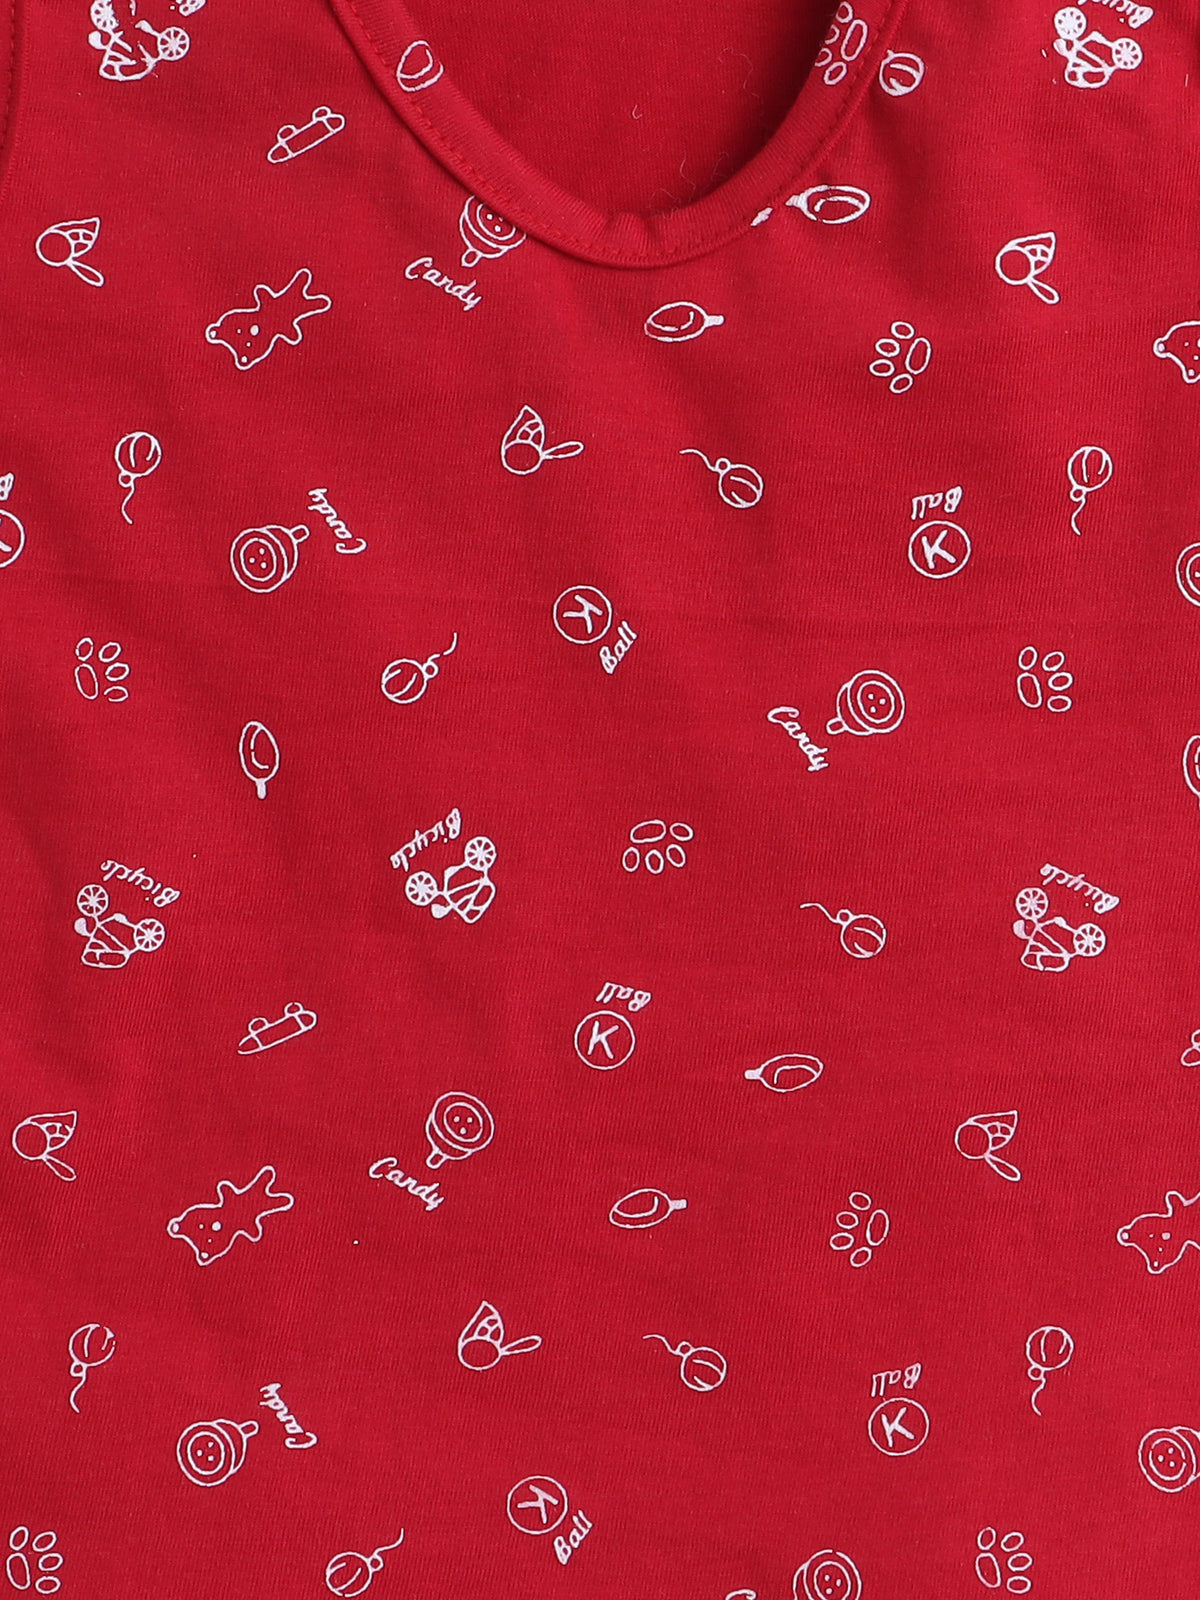 Red Printed Top with Matching Bloomer | Round Neck | Sizes 3-2Year